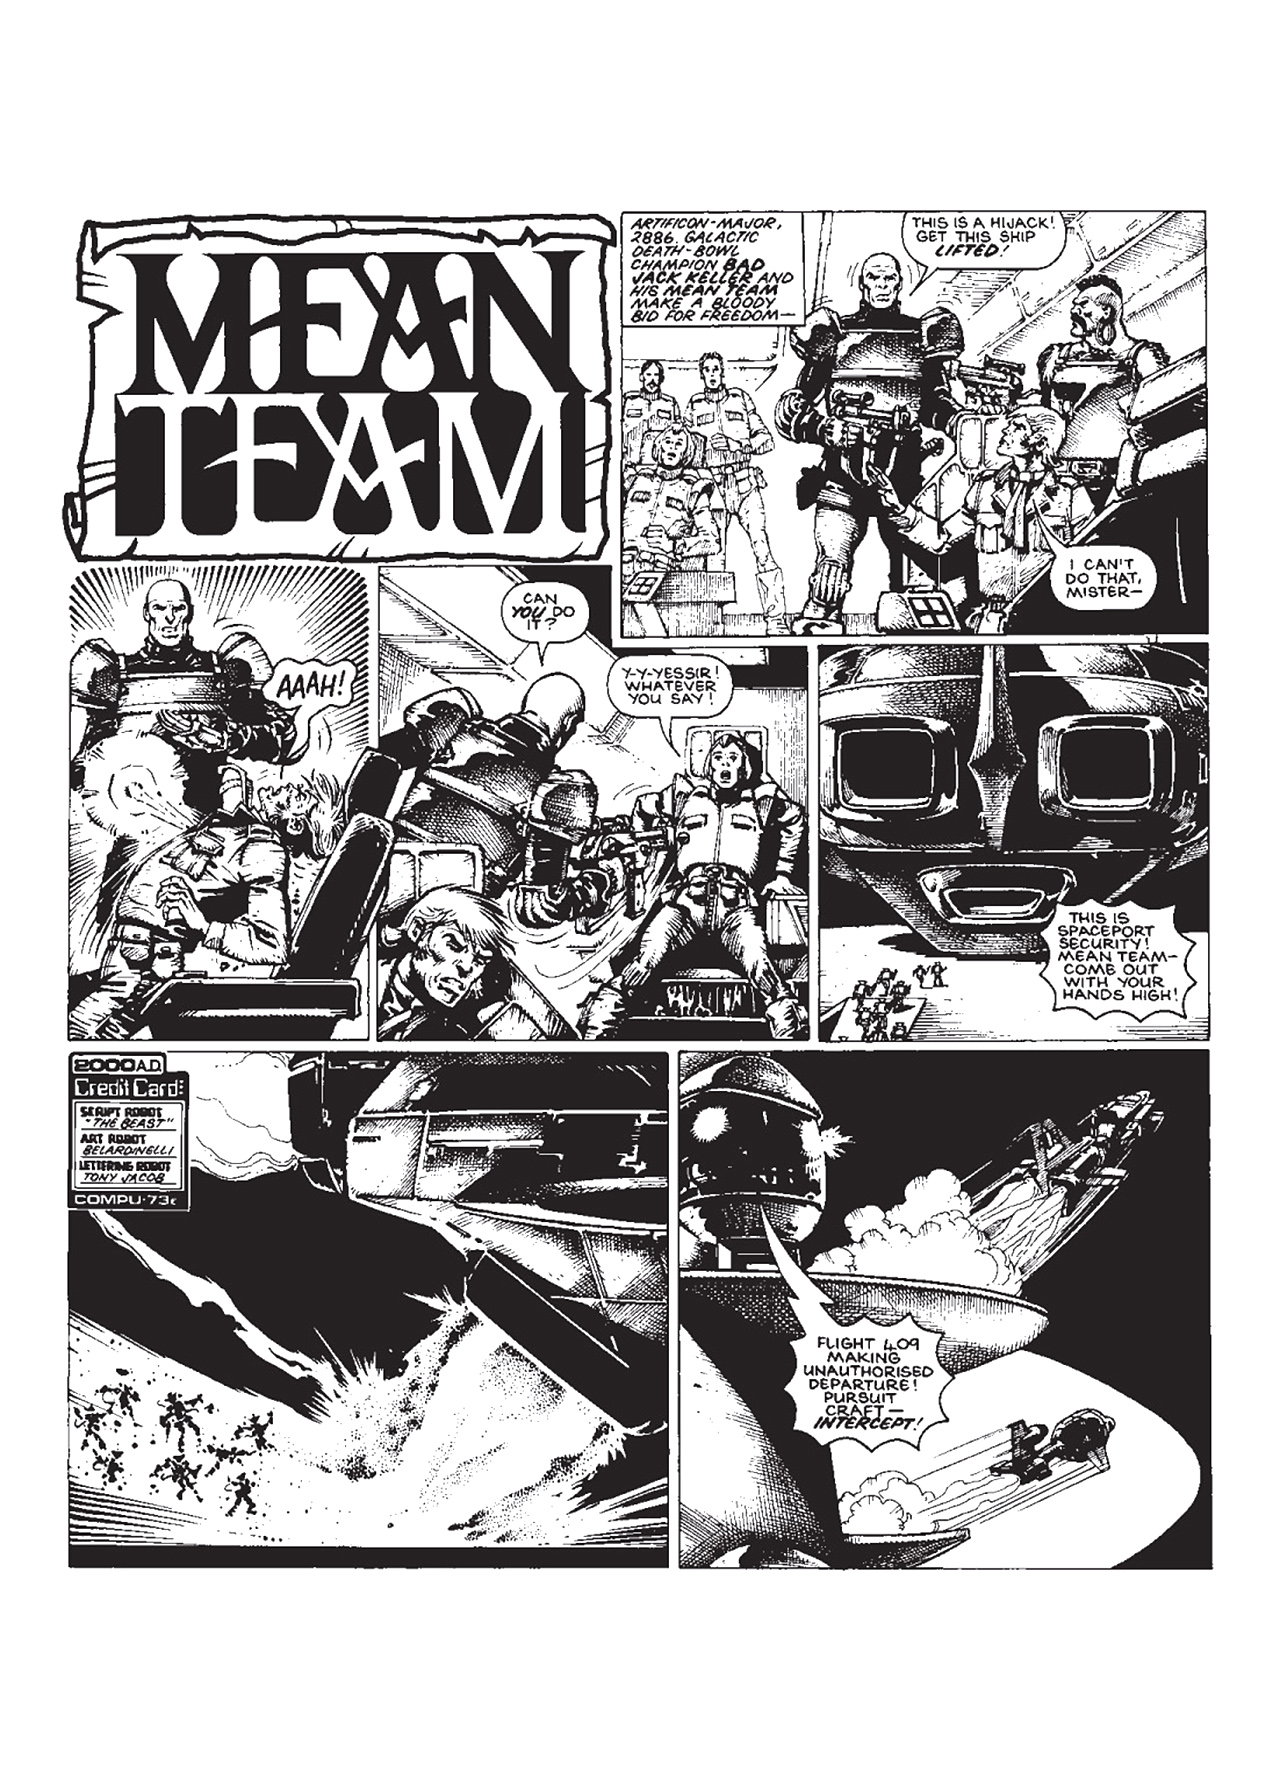 Read online Mean Team comic -  Issue # TPB - 100